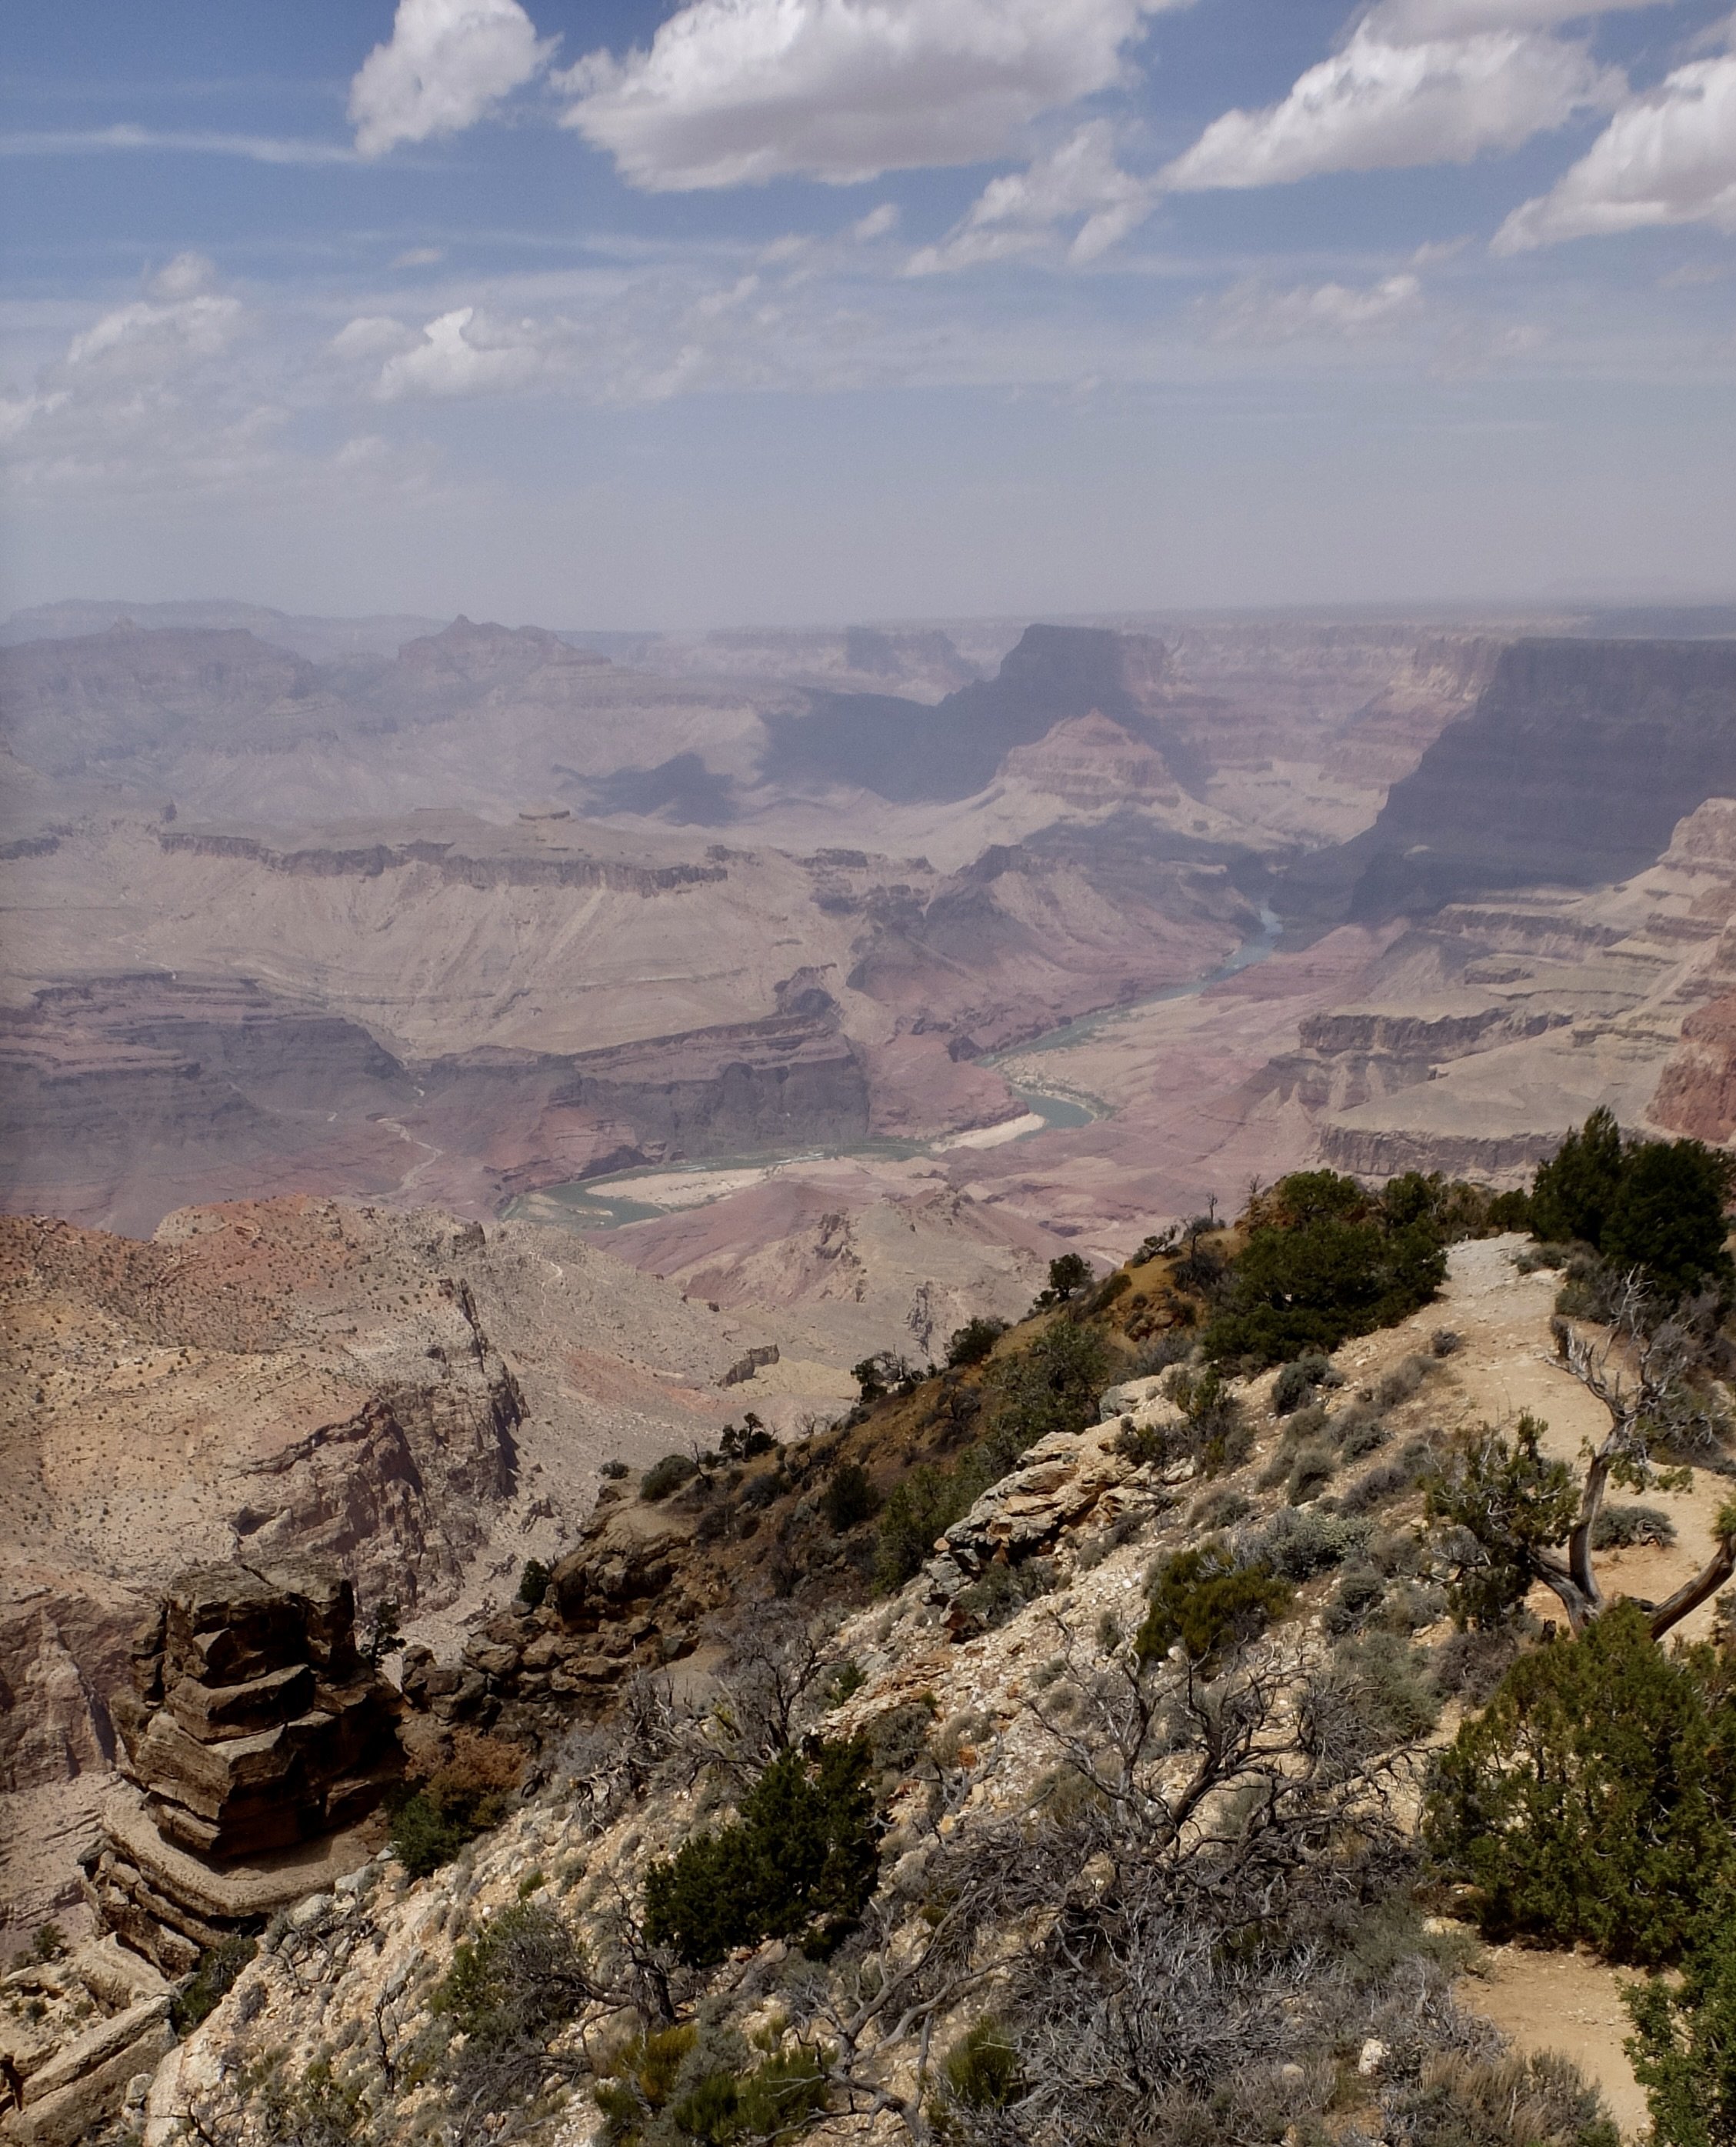  Desert View - The first view point as we drove into the Grand Canyon.  It was a grand scene but not breathtaking as it was so hazy.  We asked folks about the haze &amp; they said maybe from controlled burns.  Or, we thought the New Mexico fires.  Th